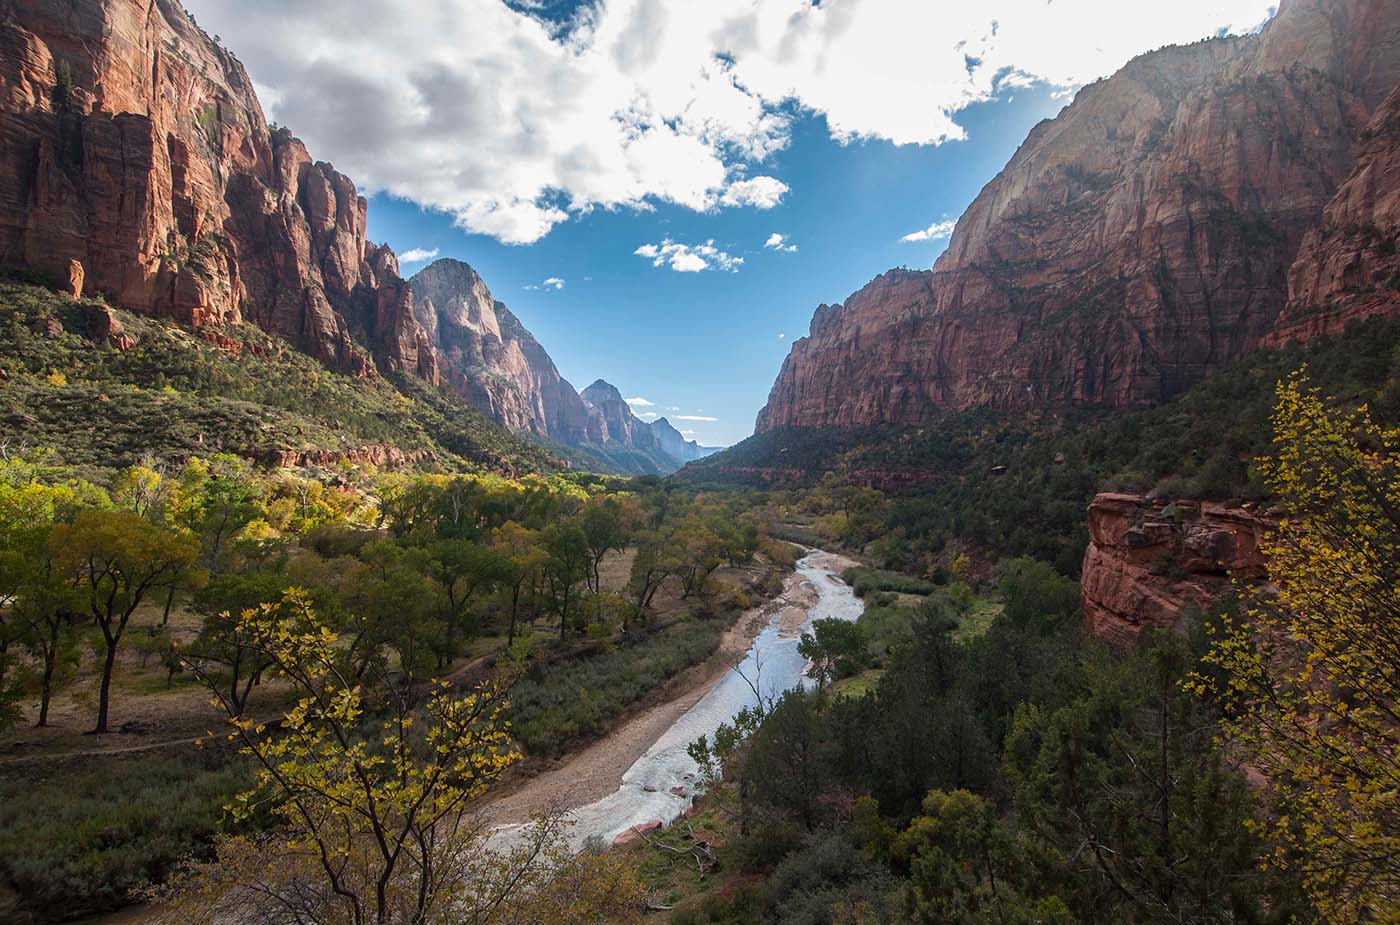 Photo from within Zion National Park.